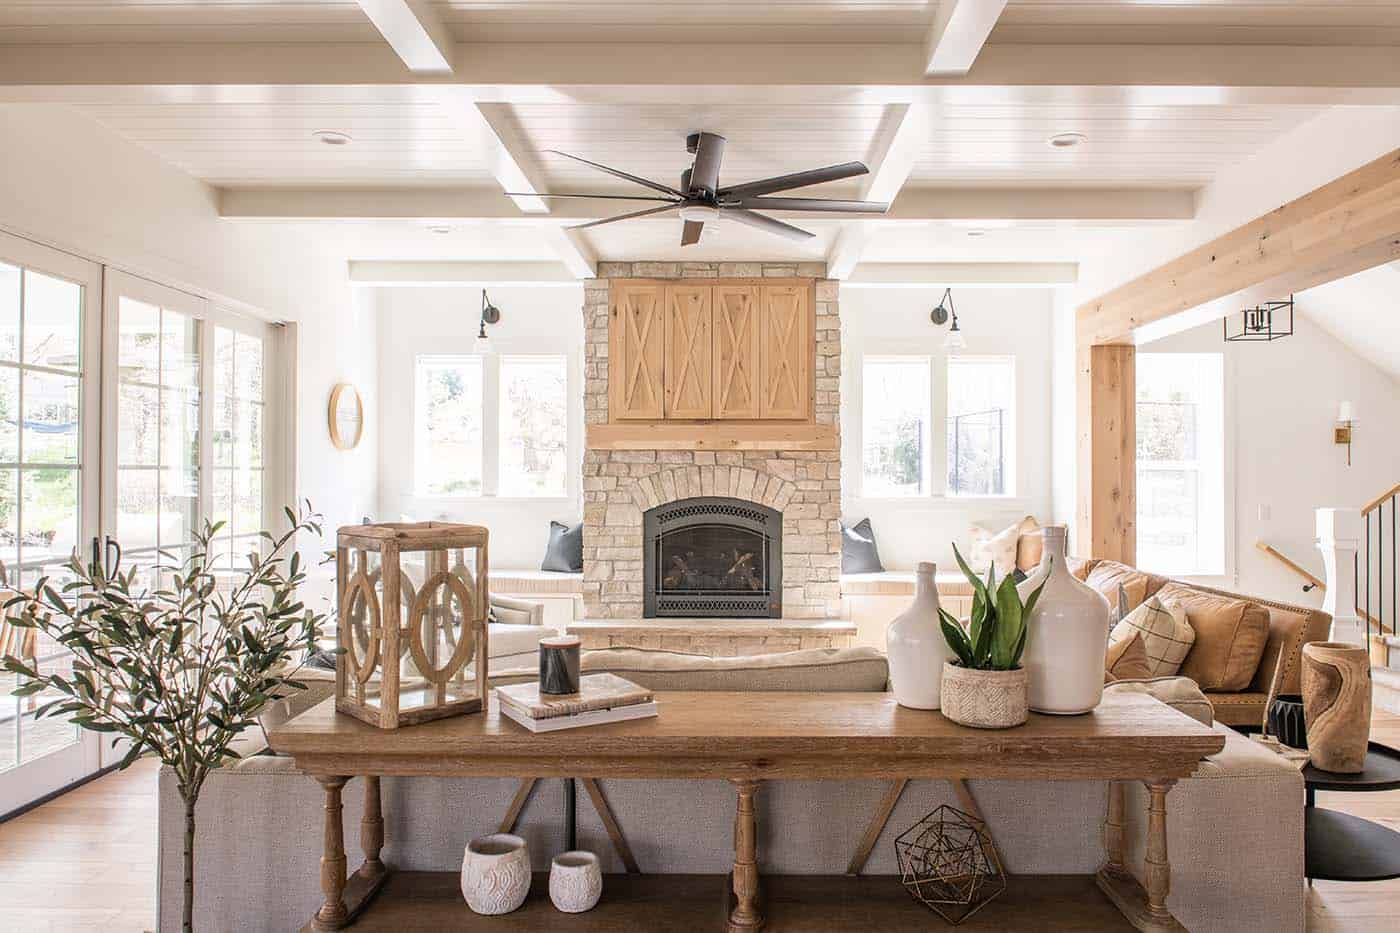 Step inside this Utah modern farmhouse with the most inspiring interiors